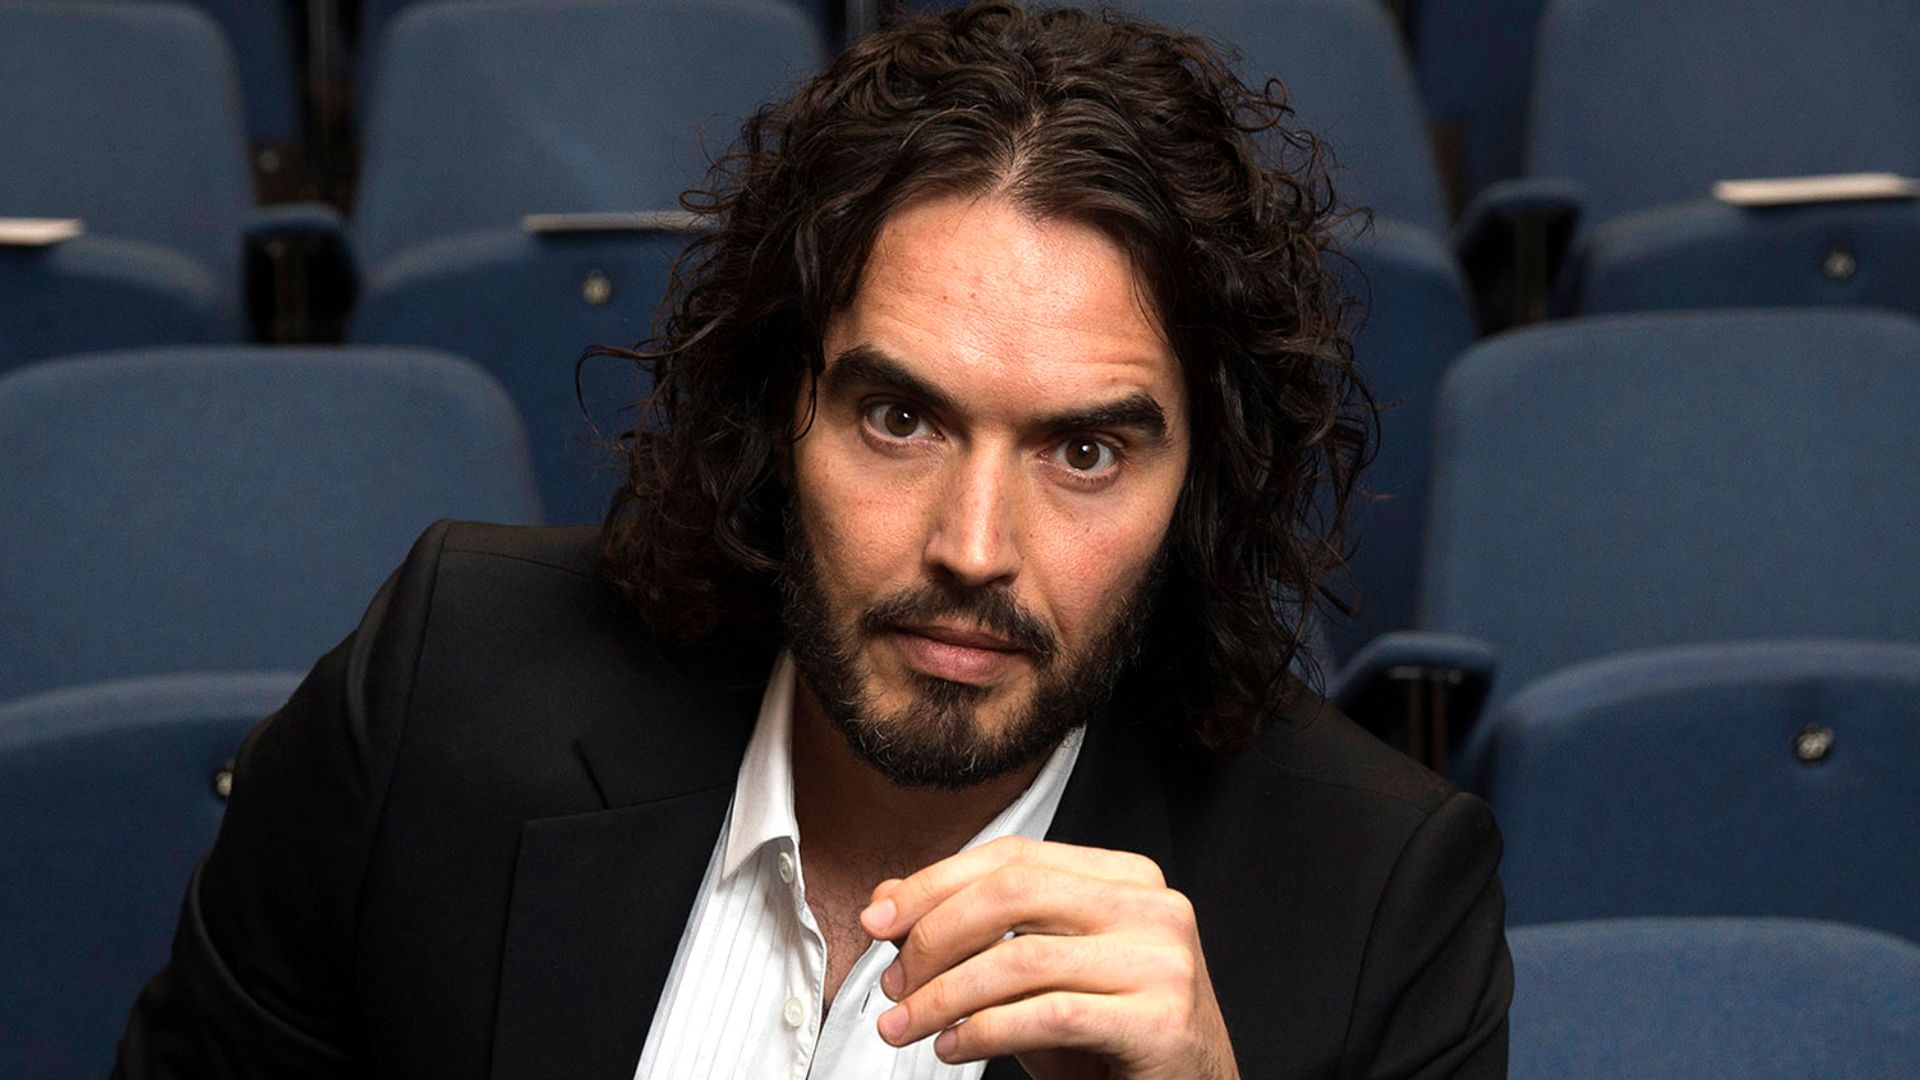 Russell Brand poses for photographs as he arrives to deliver The Reading Agency Lecture at The Institute of Education on November 25, 2014 in London, England. Russell Brand will deliver 'a manifesto on reading' which will be in part personal, sharing his own experience of books and reading while growing up in the UK.  (Photo by Carl Court/Getty Images)